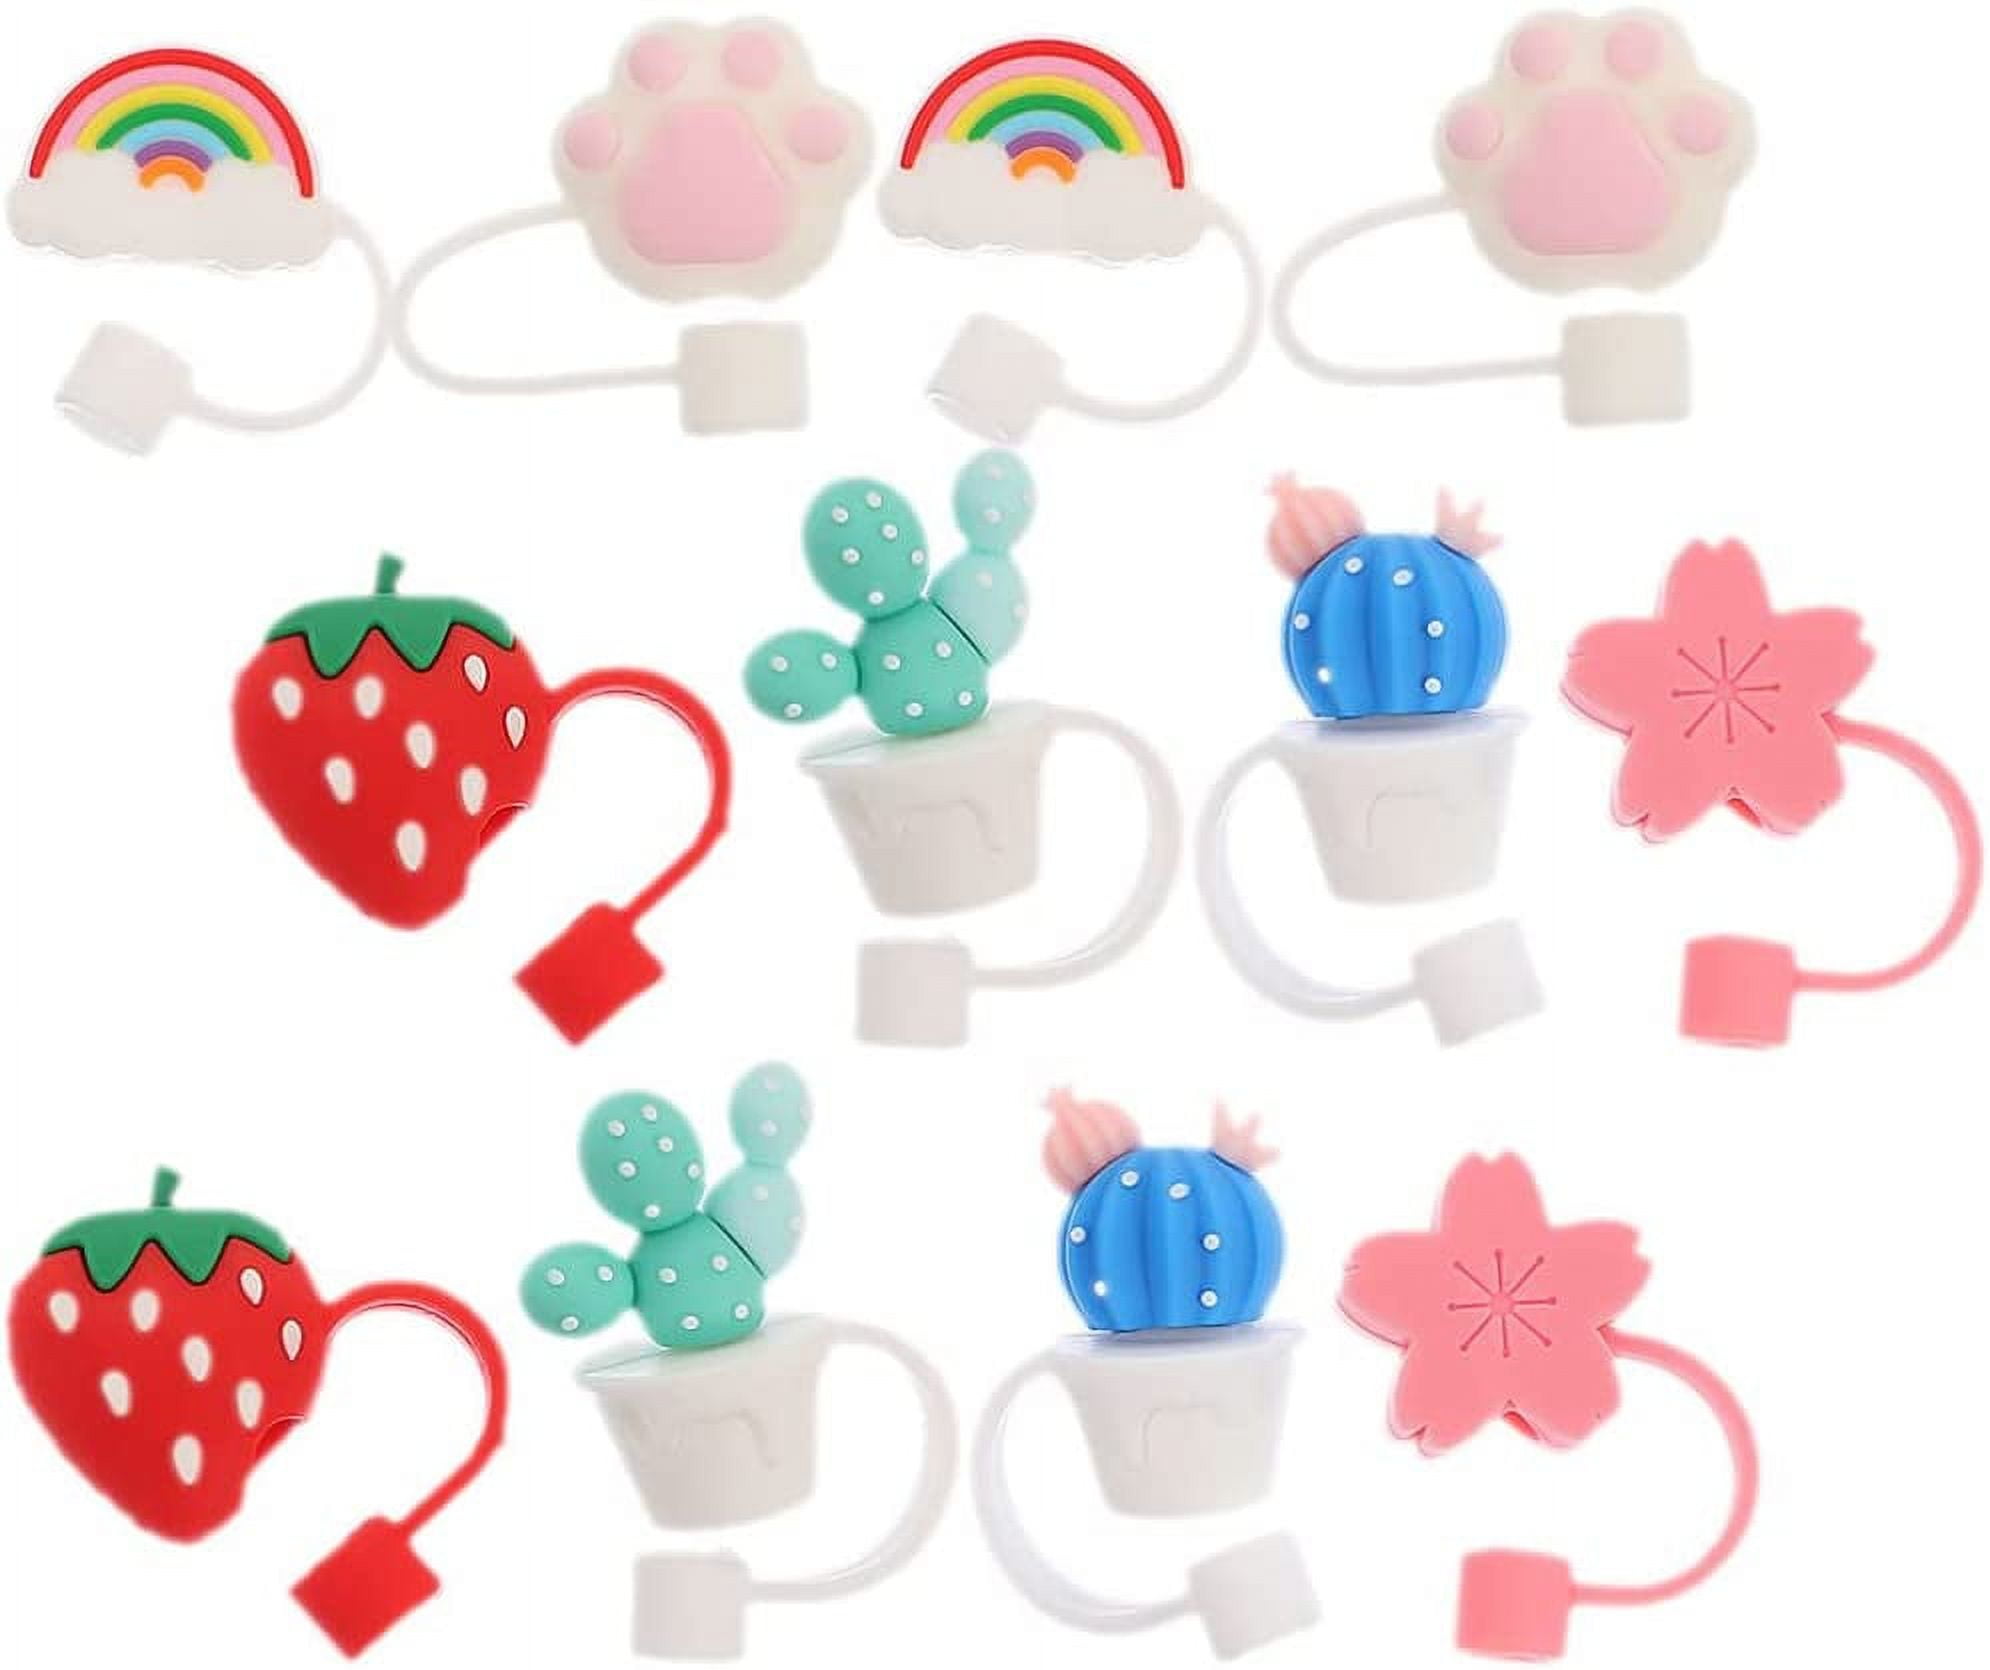 Straw Covers Cap 12pcs Silicone Straw Tips Covers Cute Silicone